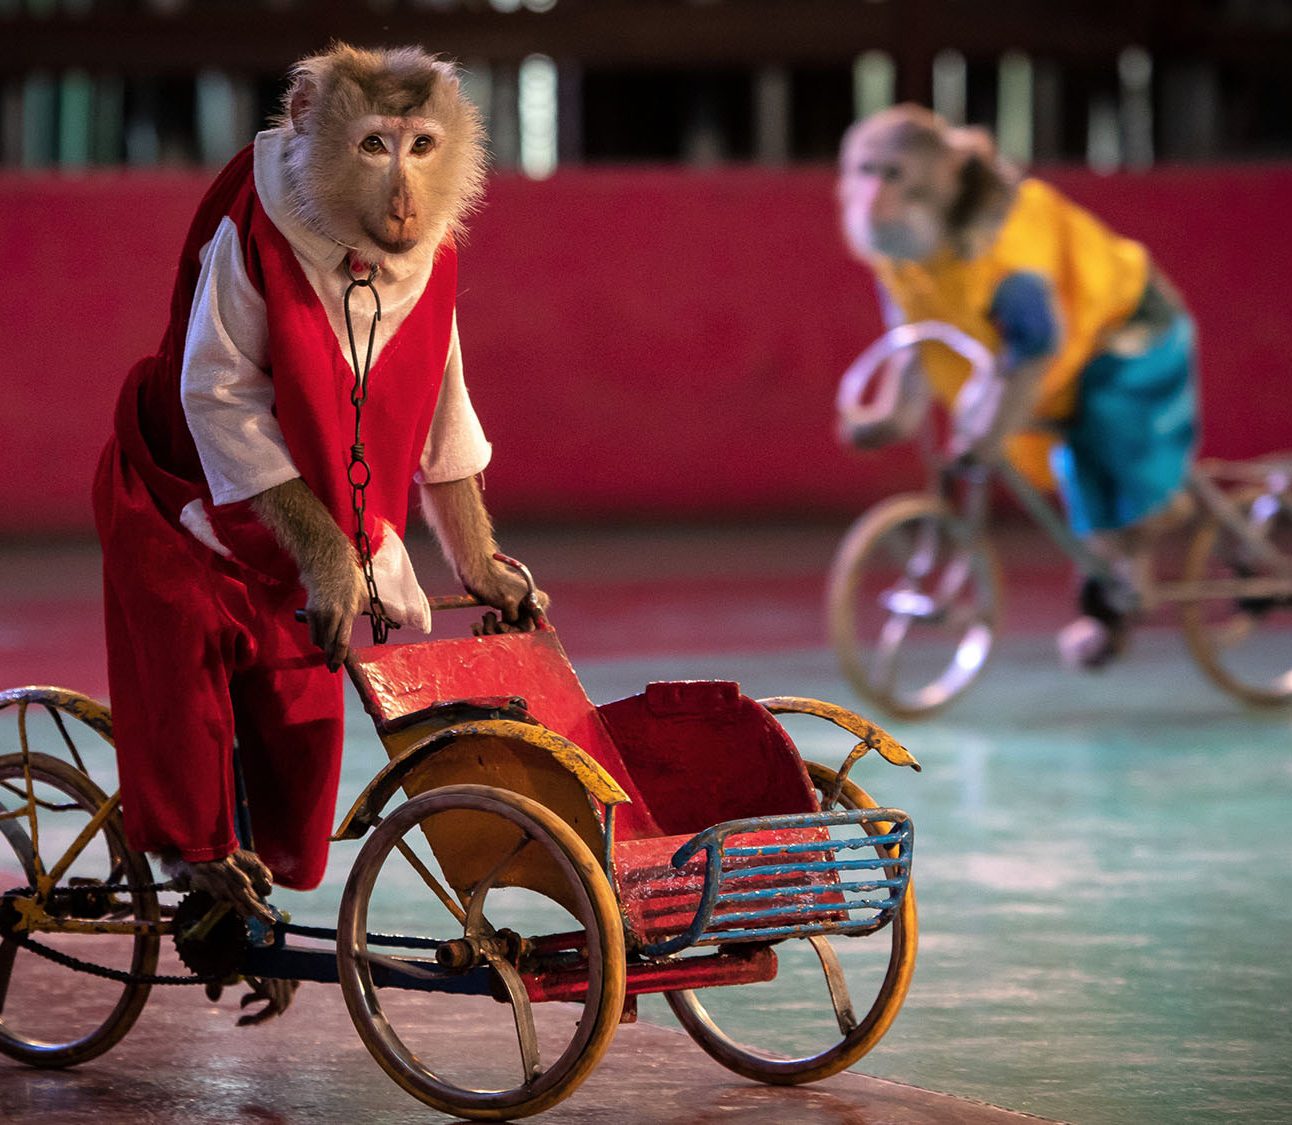 Two macaques perform on small panted bikes